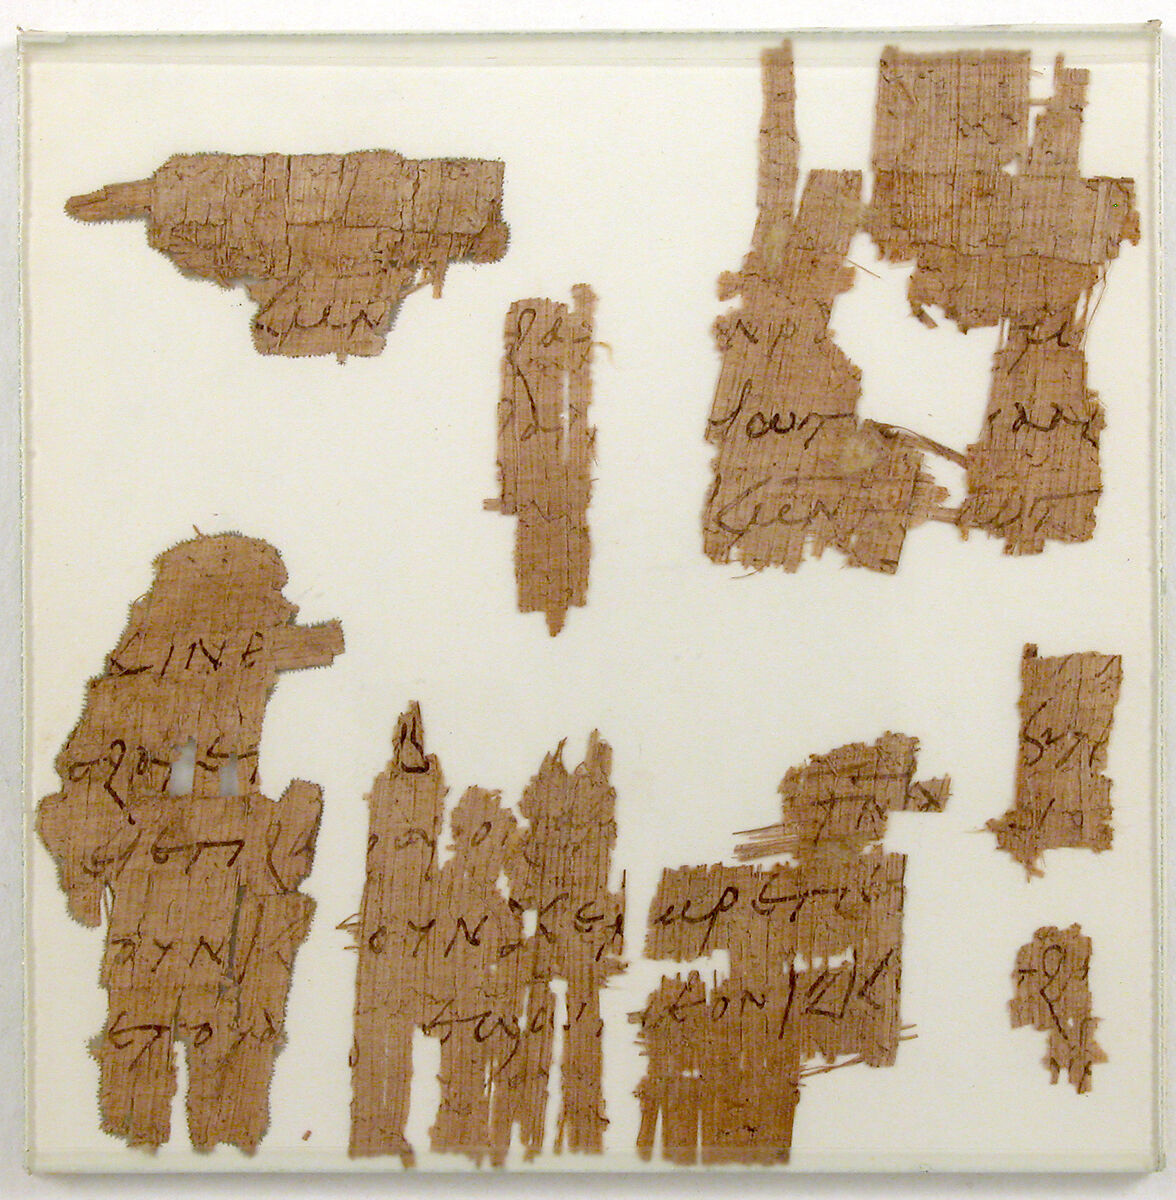 Papyri Fragments of a Letter to Epiphanius, Papyrus and ink, Coptic 